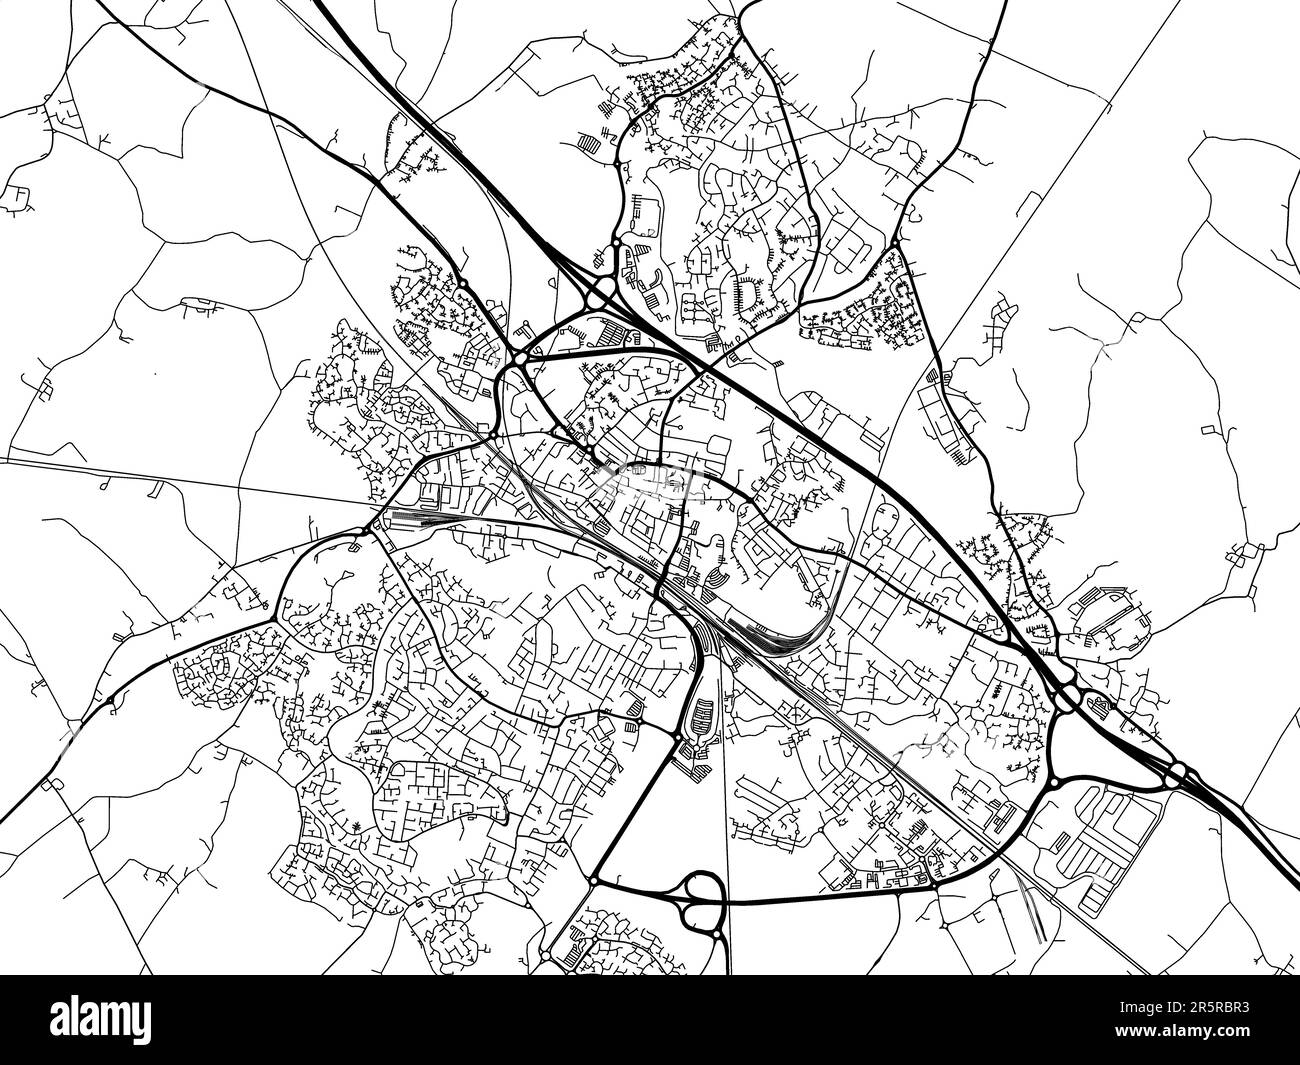 Road map of the city of  Ashford in the United Kingdom on a white background. Stock Photo